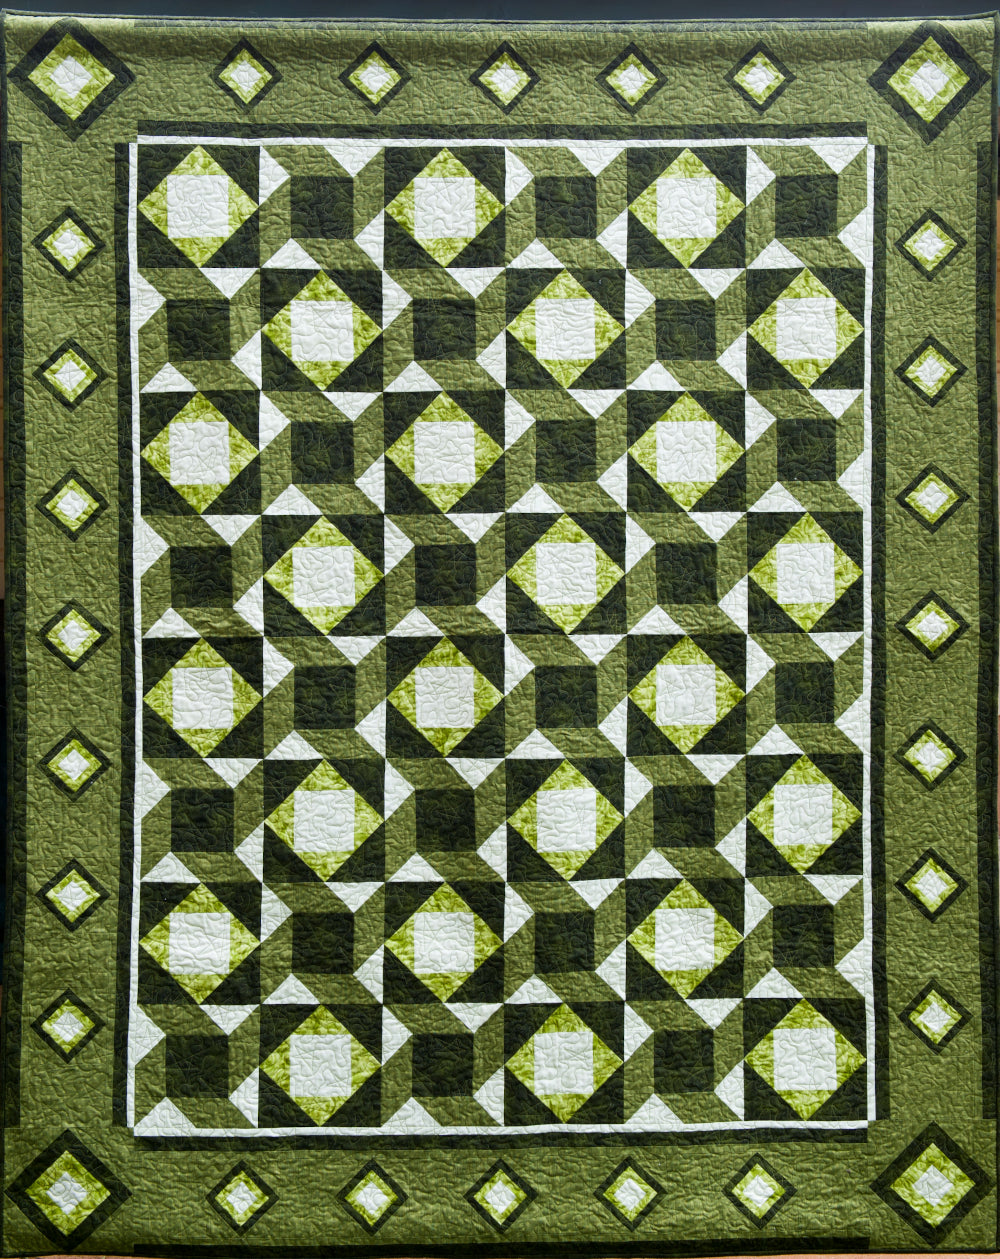 a green patchwork quilt pattern representing woven stars by Jennifer Houlden